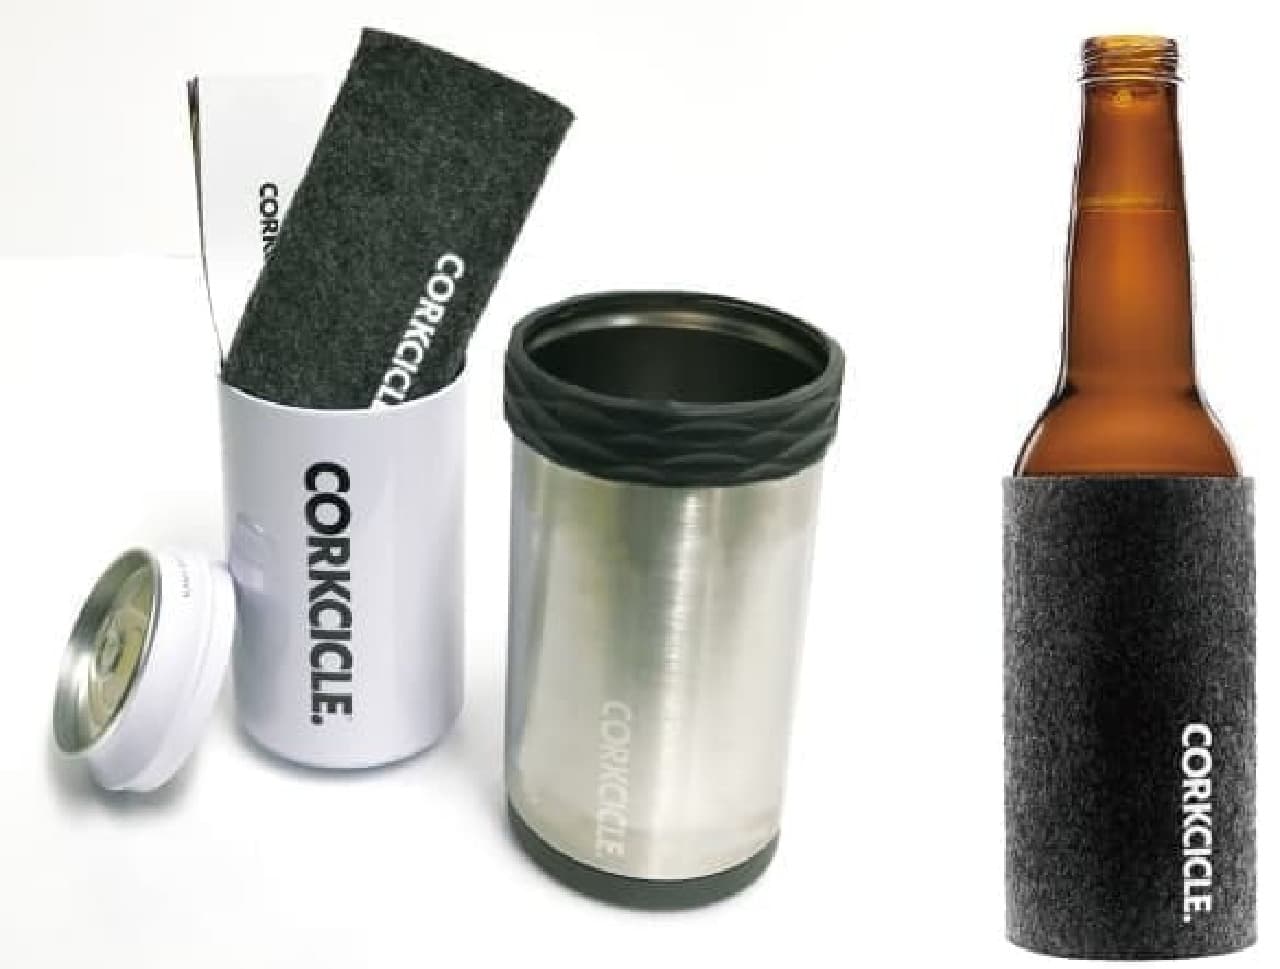 CORKCICLE Cold storage can holder "Arctican"